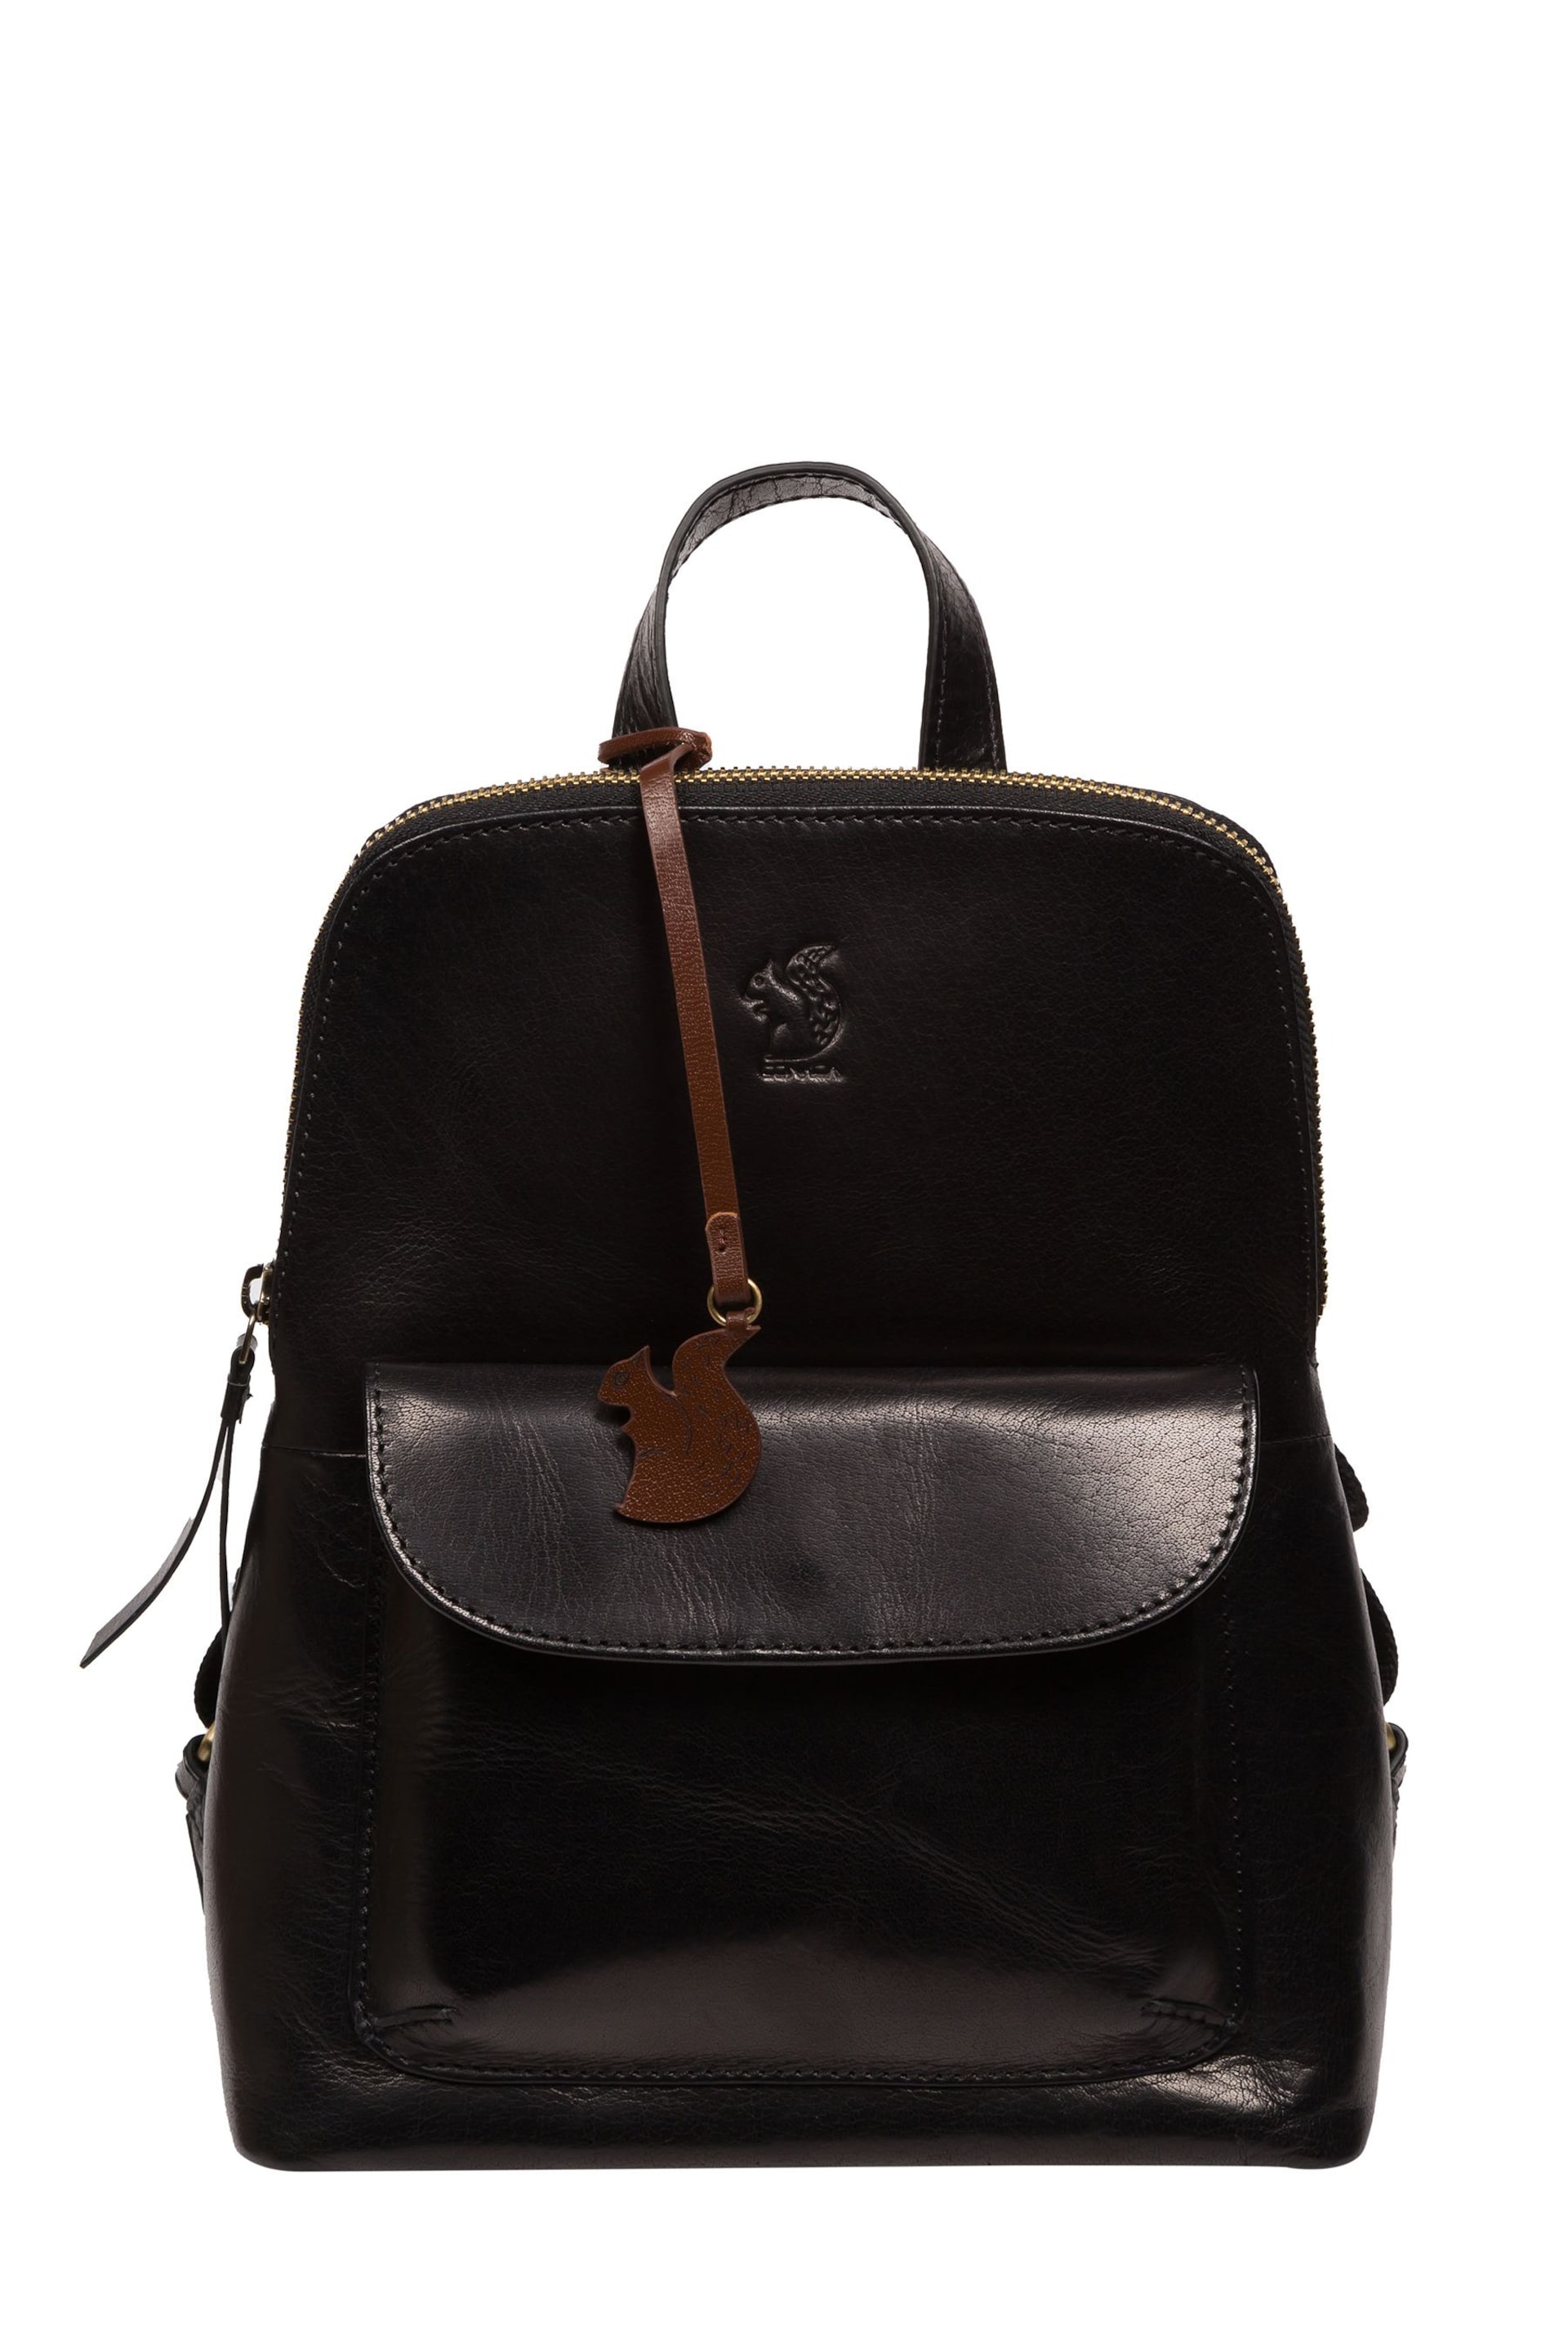 Conkca 'Kerrie' Leather Backpack - Image 2 of 6